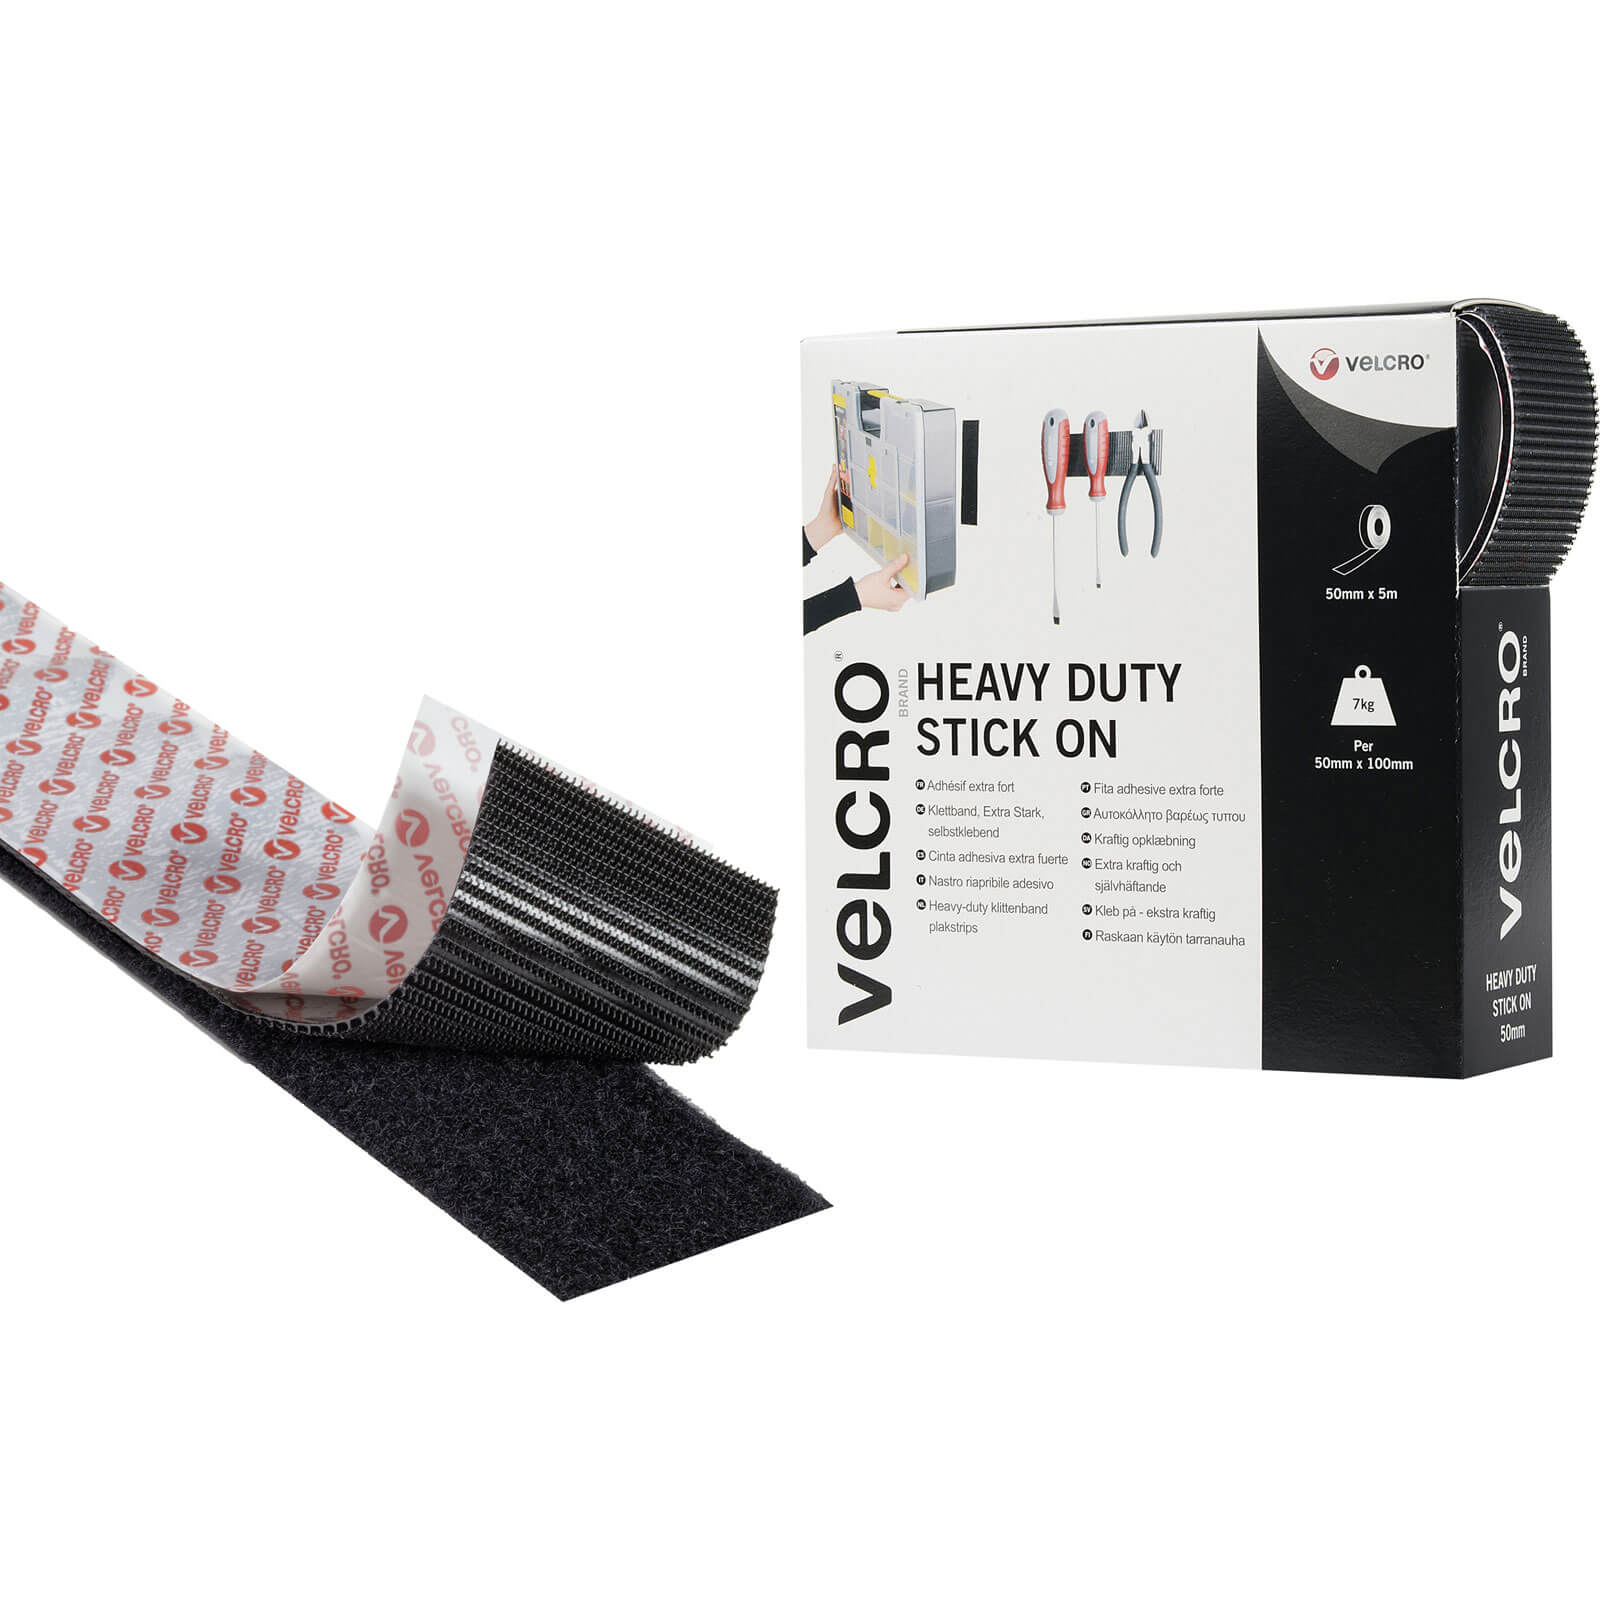 Image of Velcro Heavy Duty Stick On Tape Black 50mm 5m Pack of 1